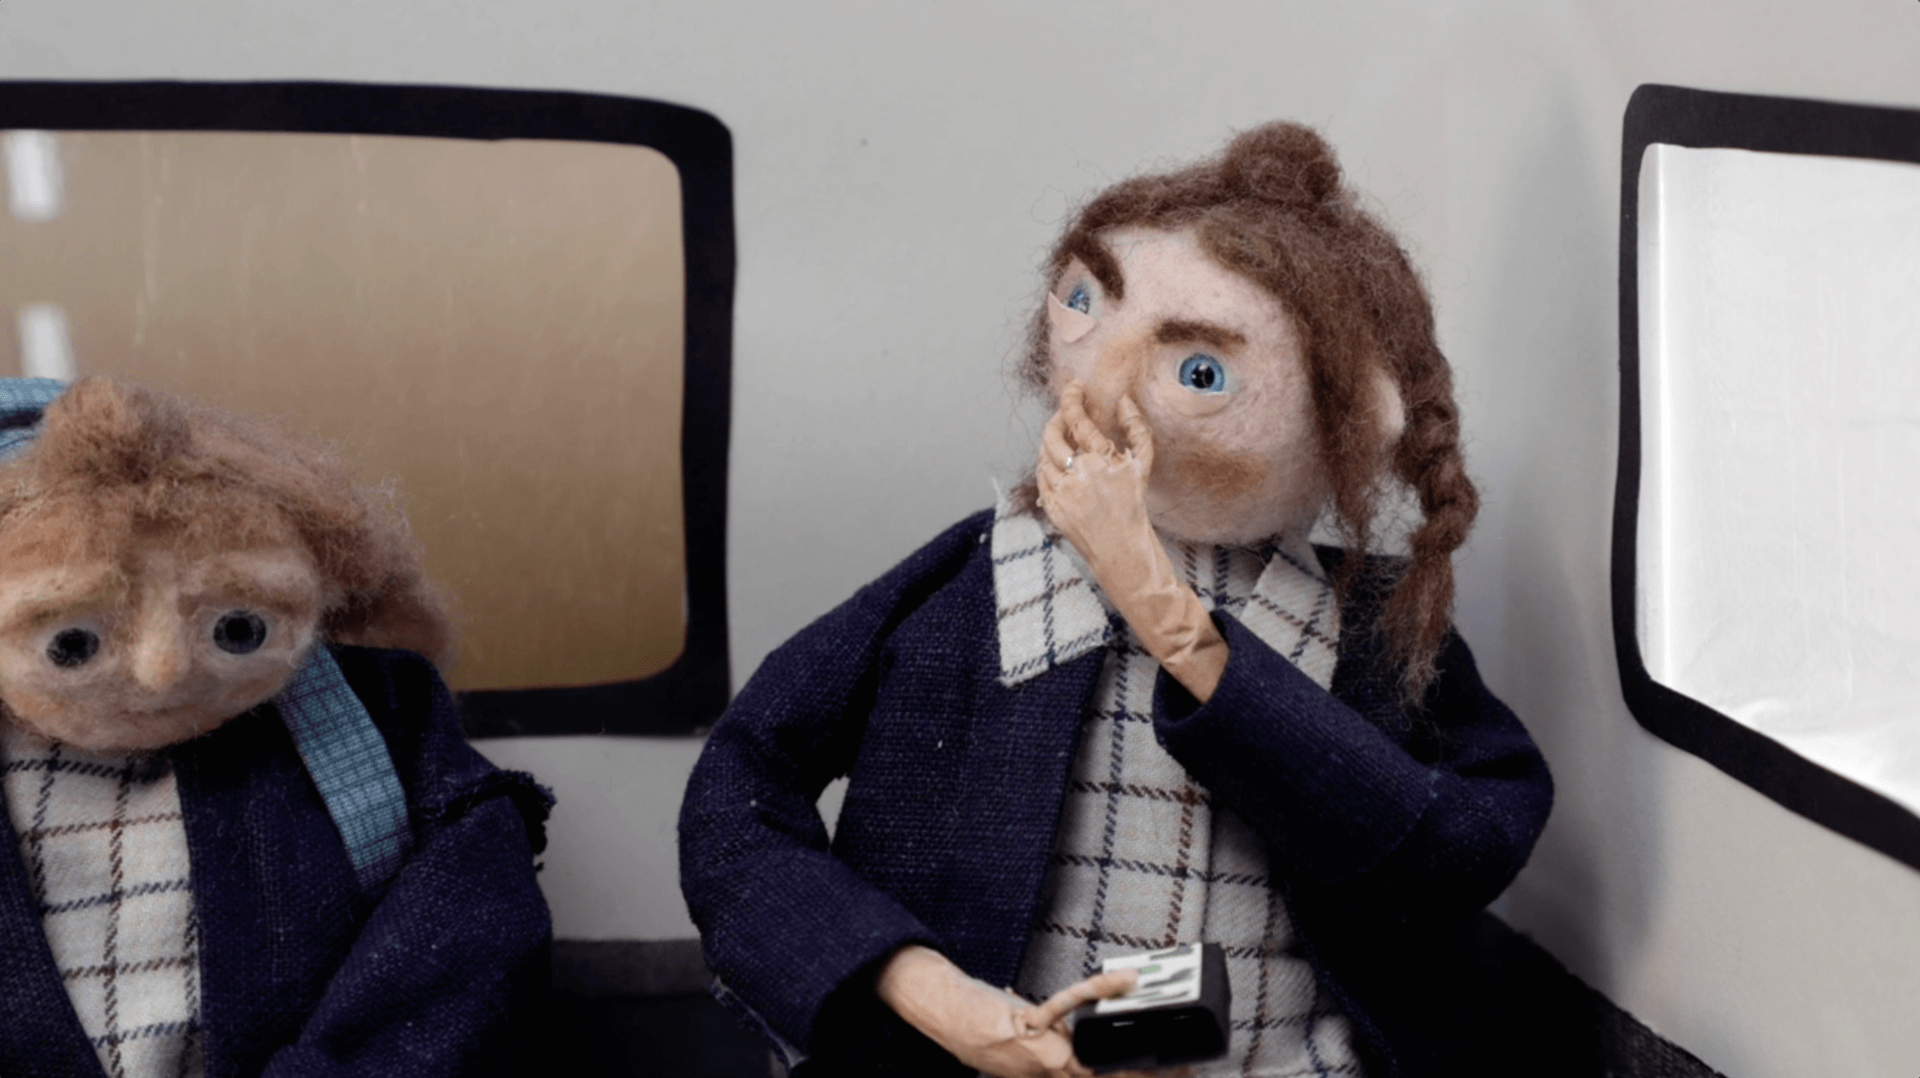 Photograph of two model figures – one holding her nose - made from felted wool. The figures are wearing the same uniform and sat on what looks like the back corner of a bus.